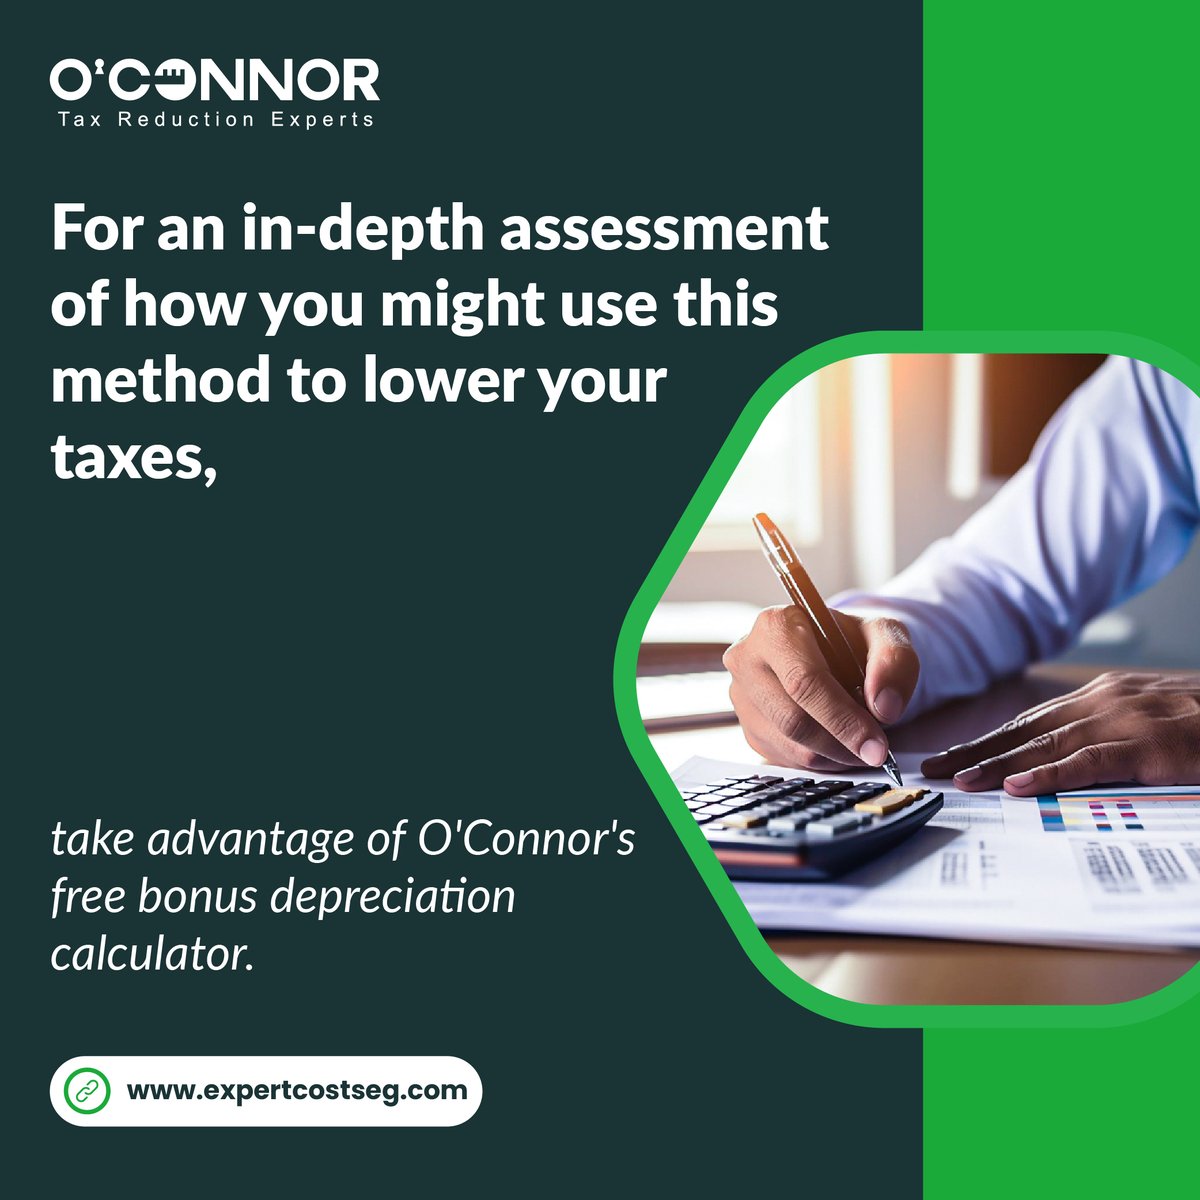 Contact O'Connor to schedule a meeting to explore how we might help you reduce your federal income tax burden. Visit Expert Cost Segregation

#Expertcostsegregation #OConnor #Taxburden